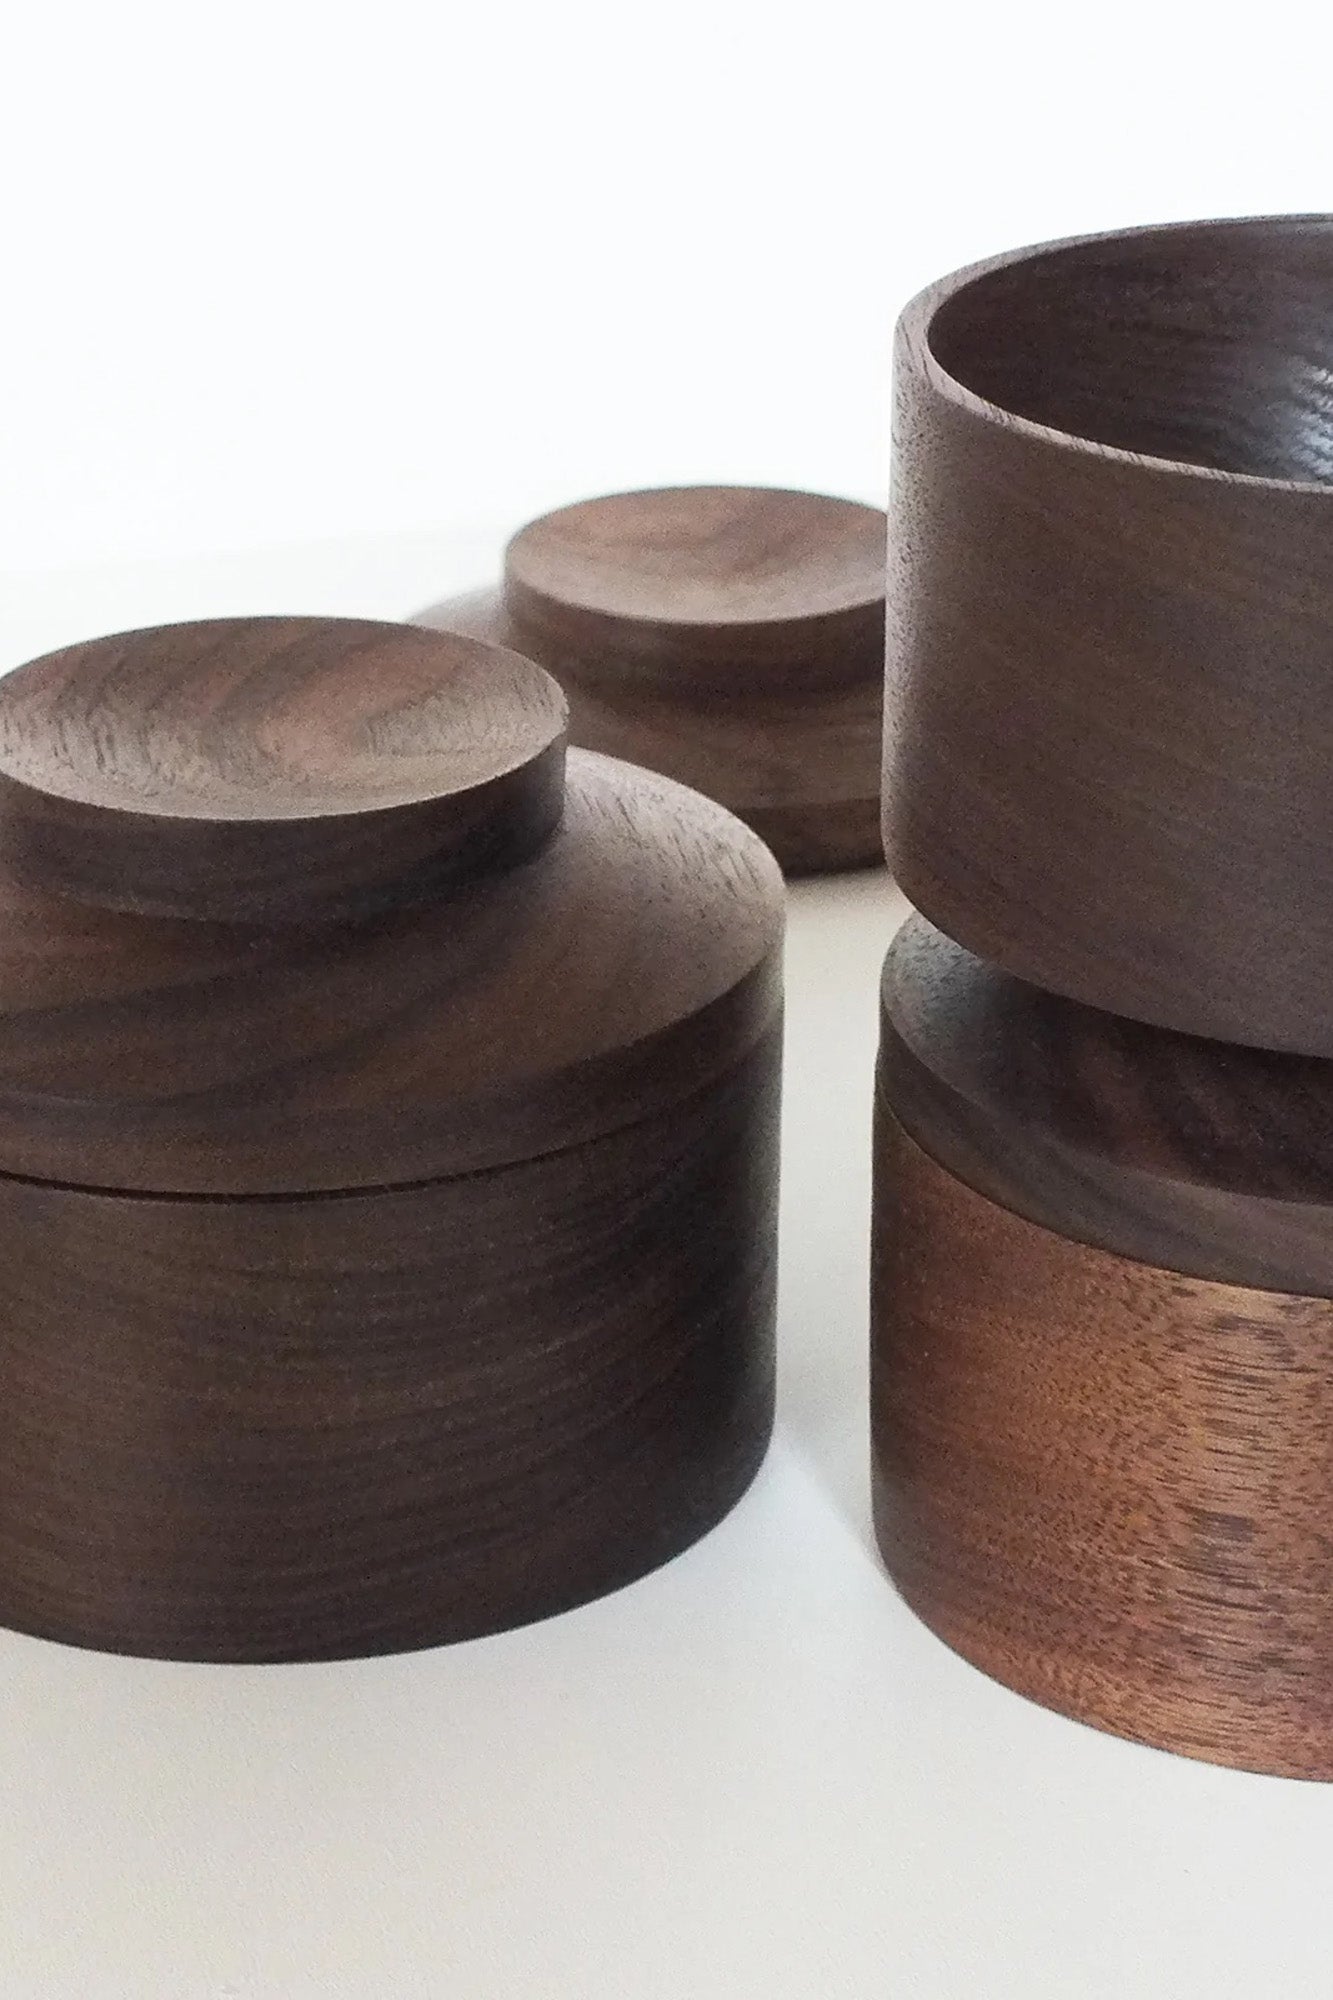 Close-up of the Repeat Stackable Little Storage Jars - The unique stackable design and dark walnut wood grains are highlighted in this close-up view.